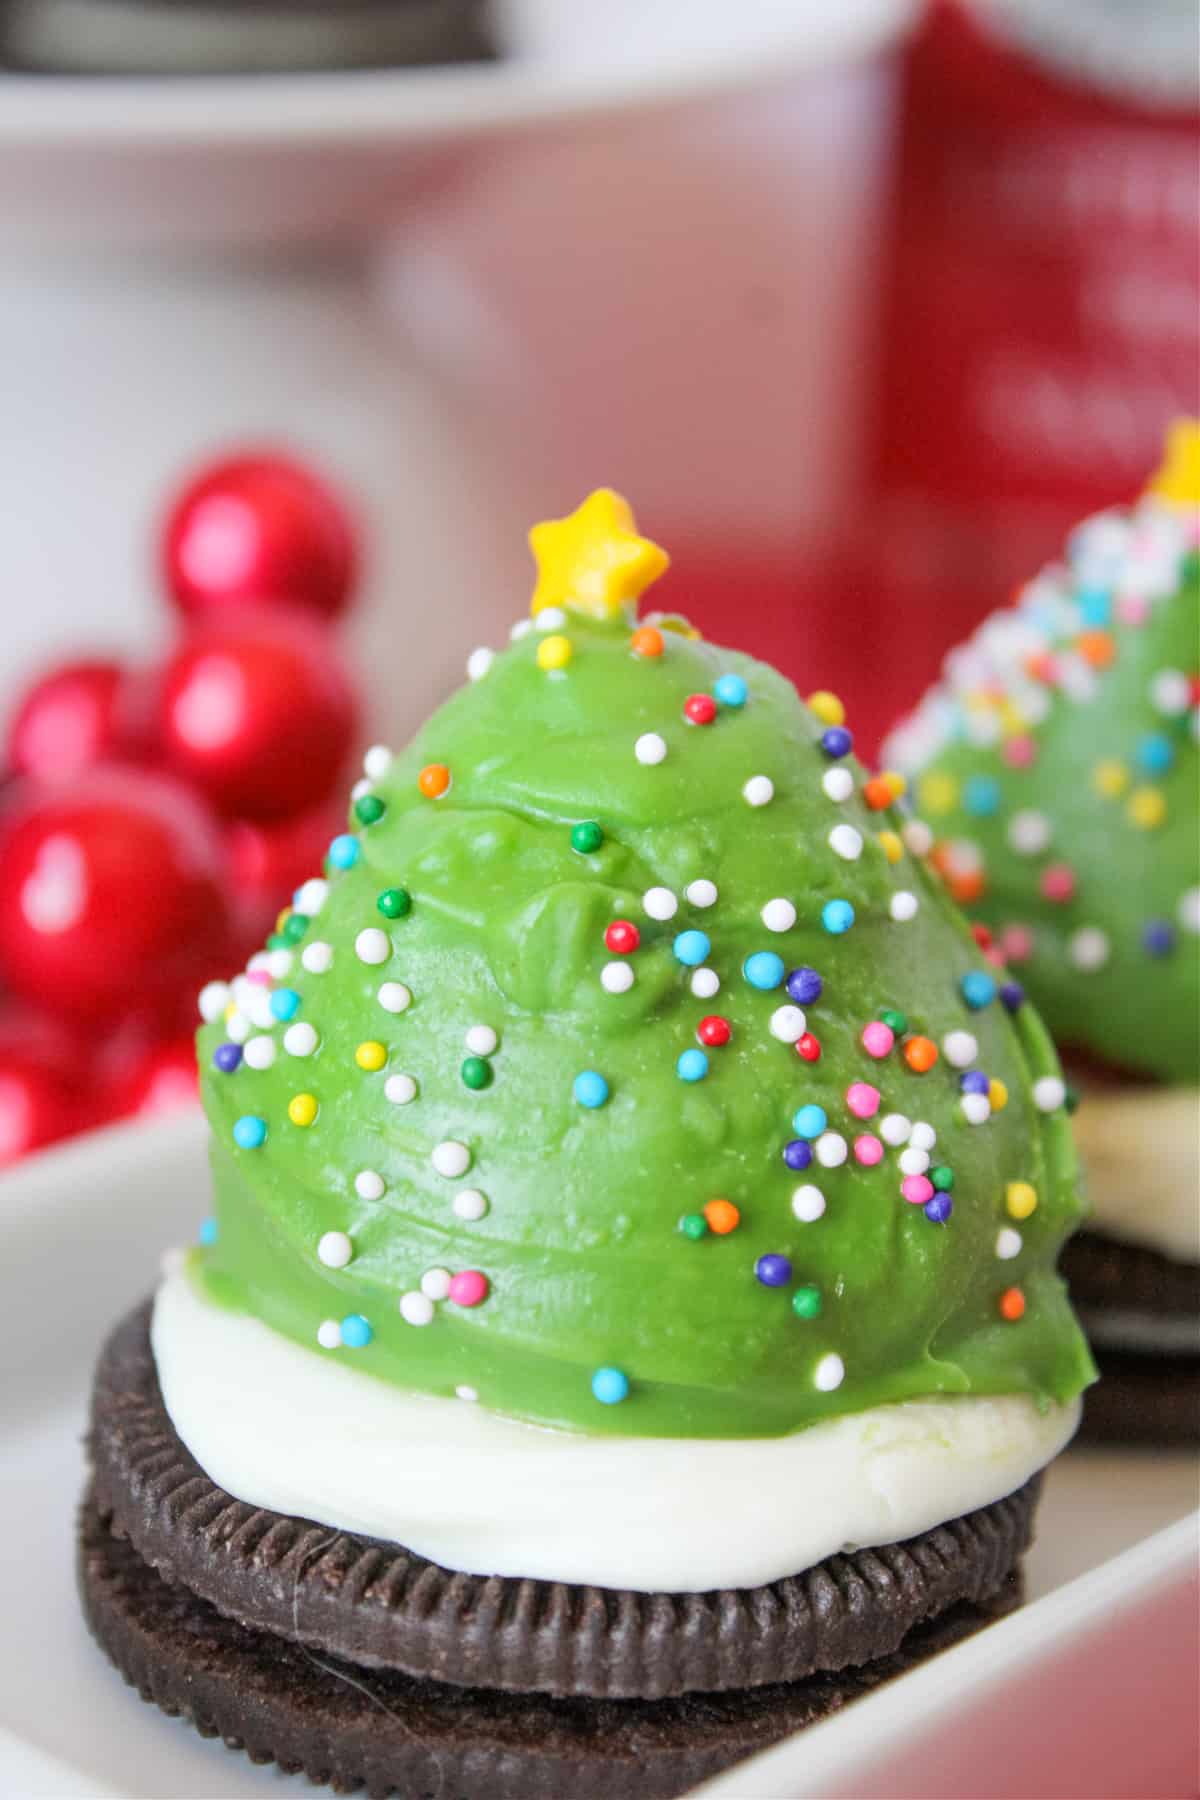 Strawberry dipped in green chocolate and decorated with sprinkles to look like a Christmas tree. The berry is sitting on an oreo cookie topped with vanilla frosting.